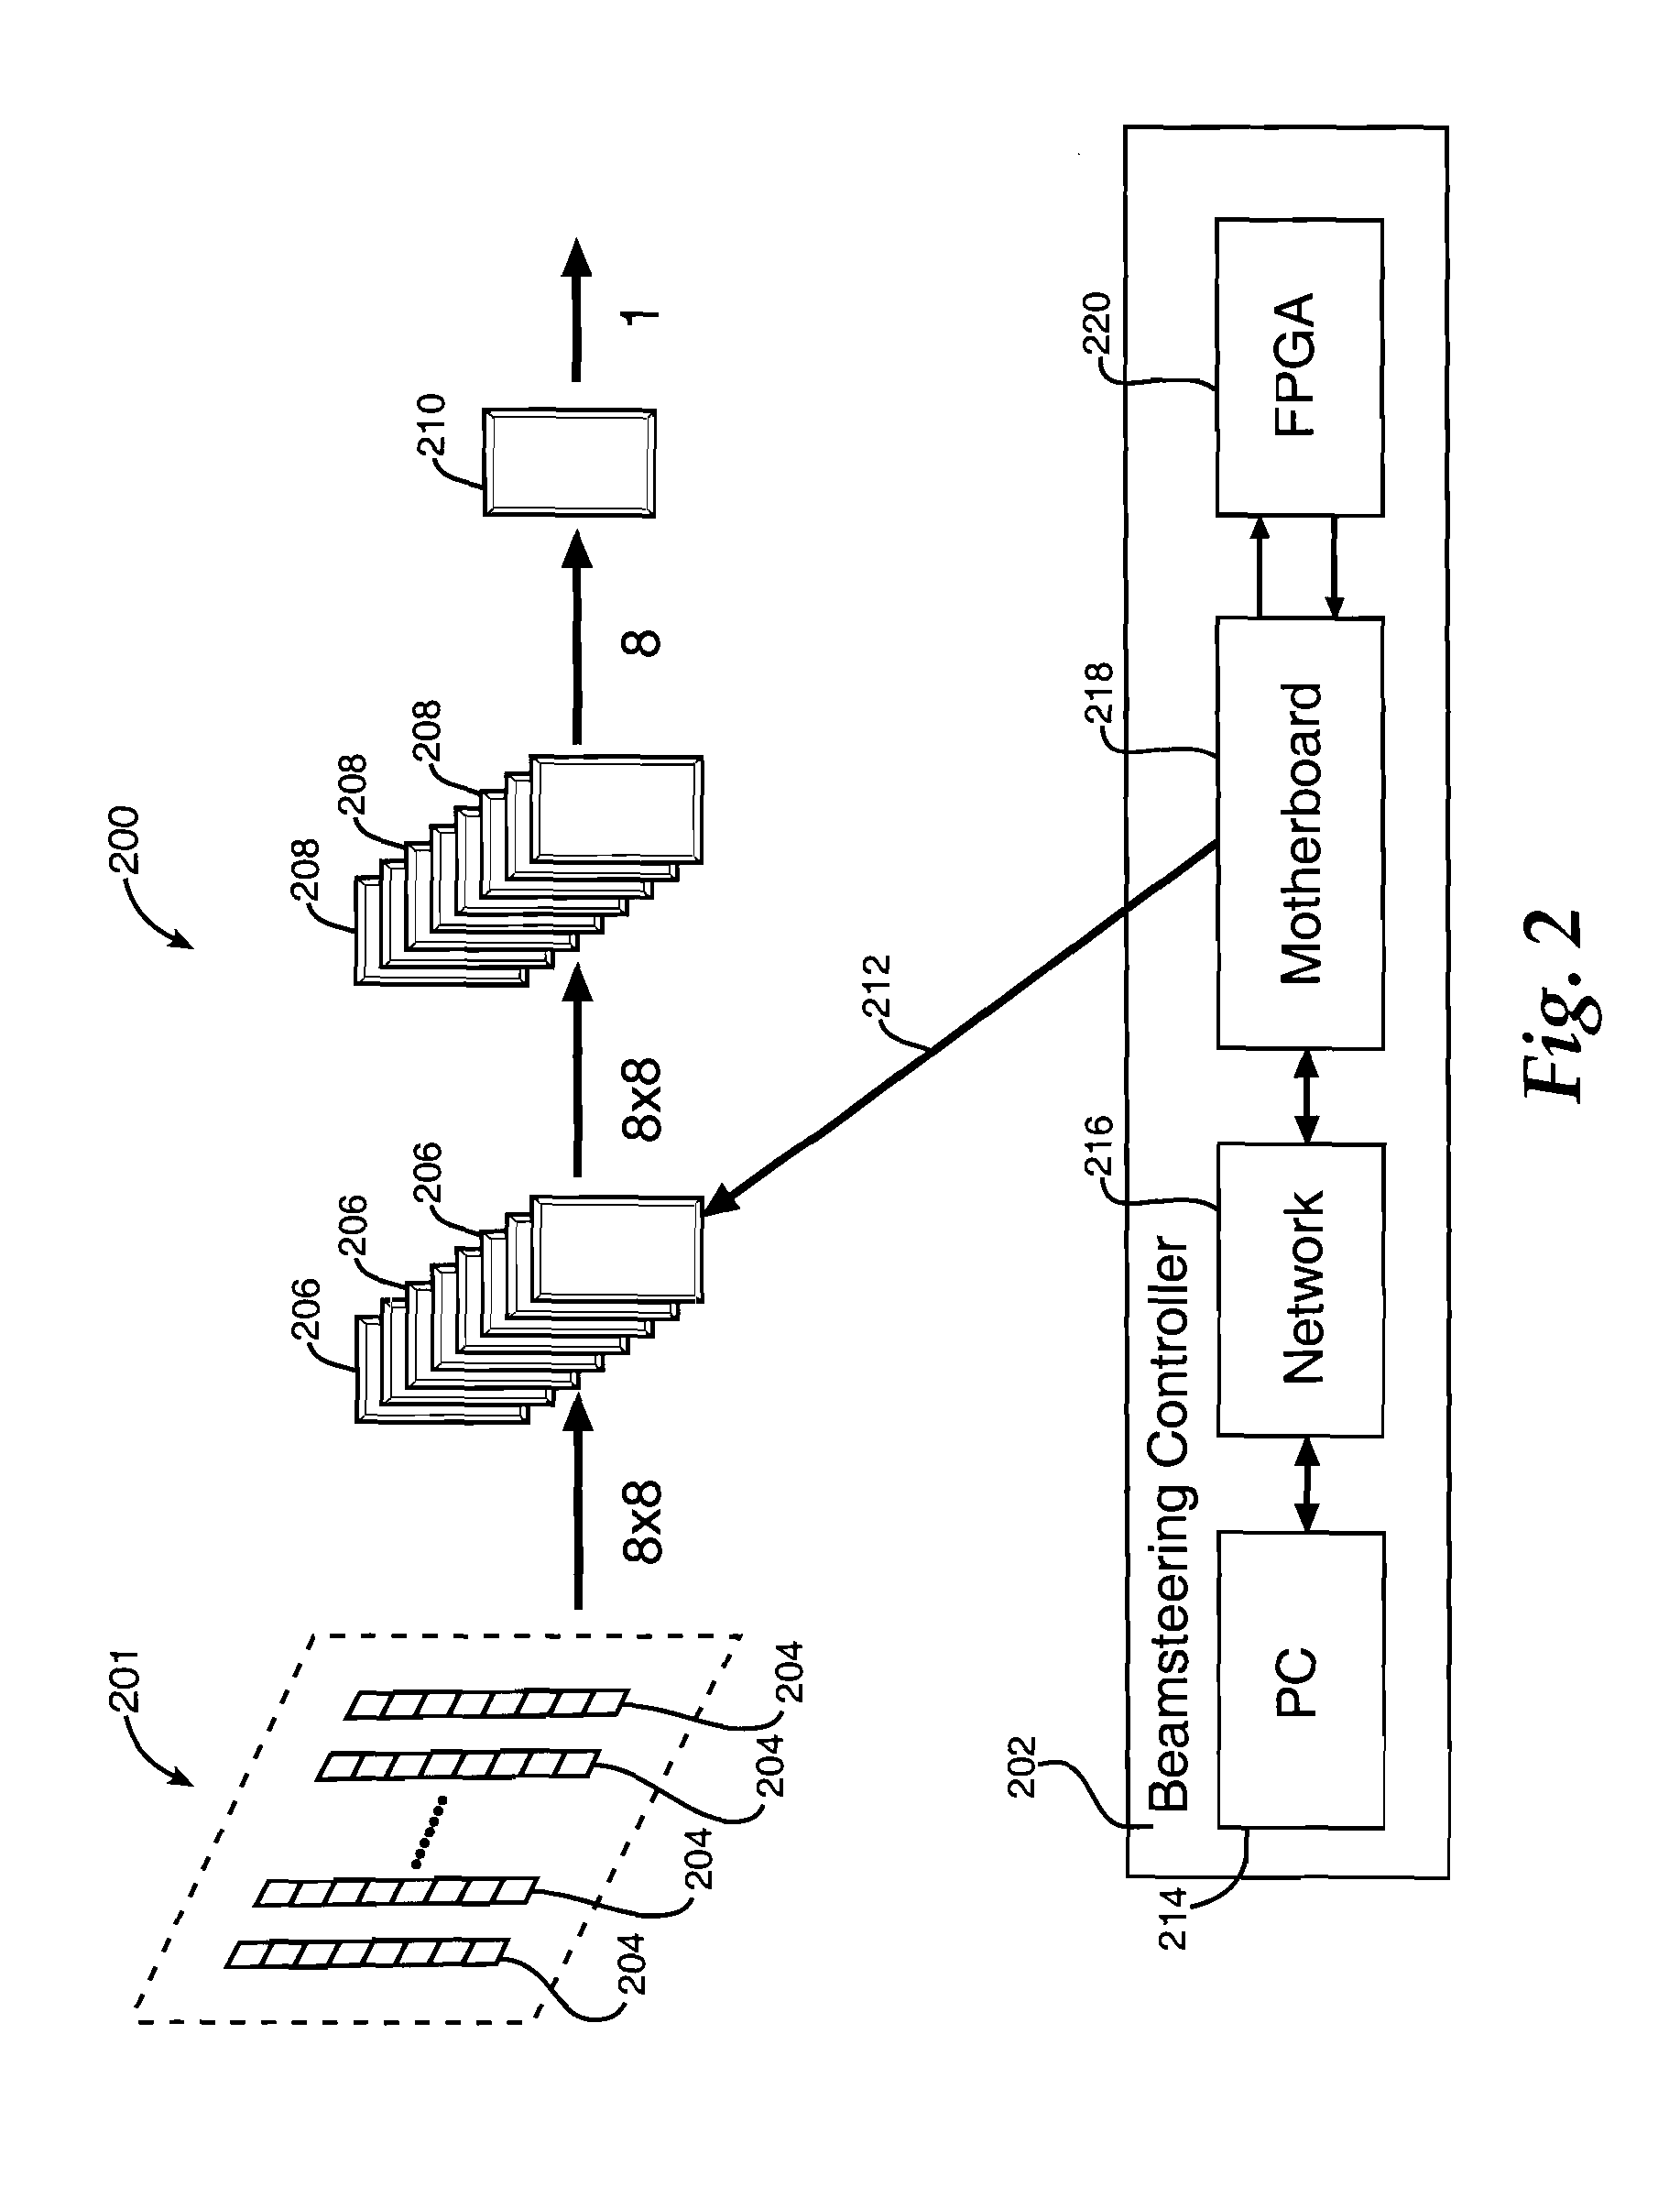 Scalable phased array beamsteering control system